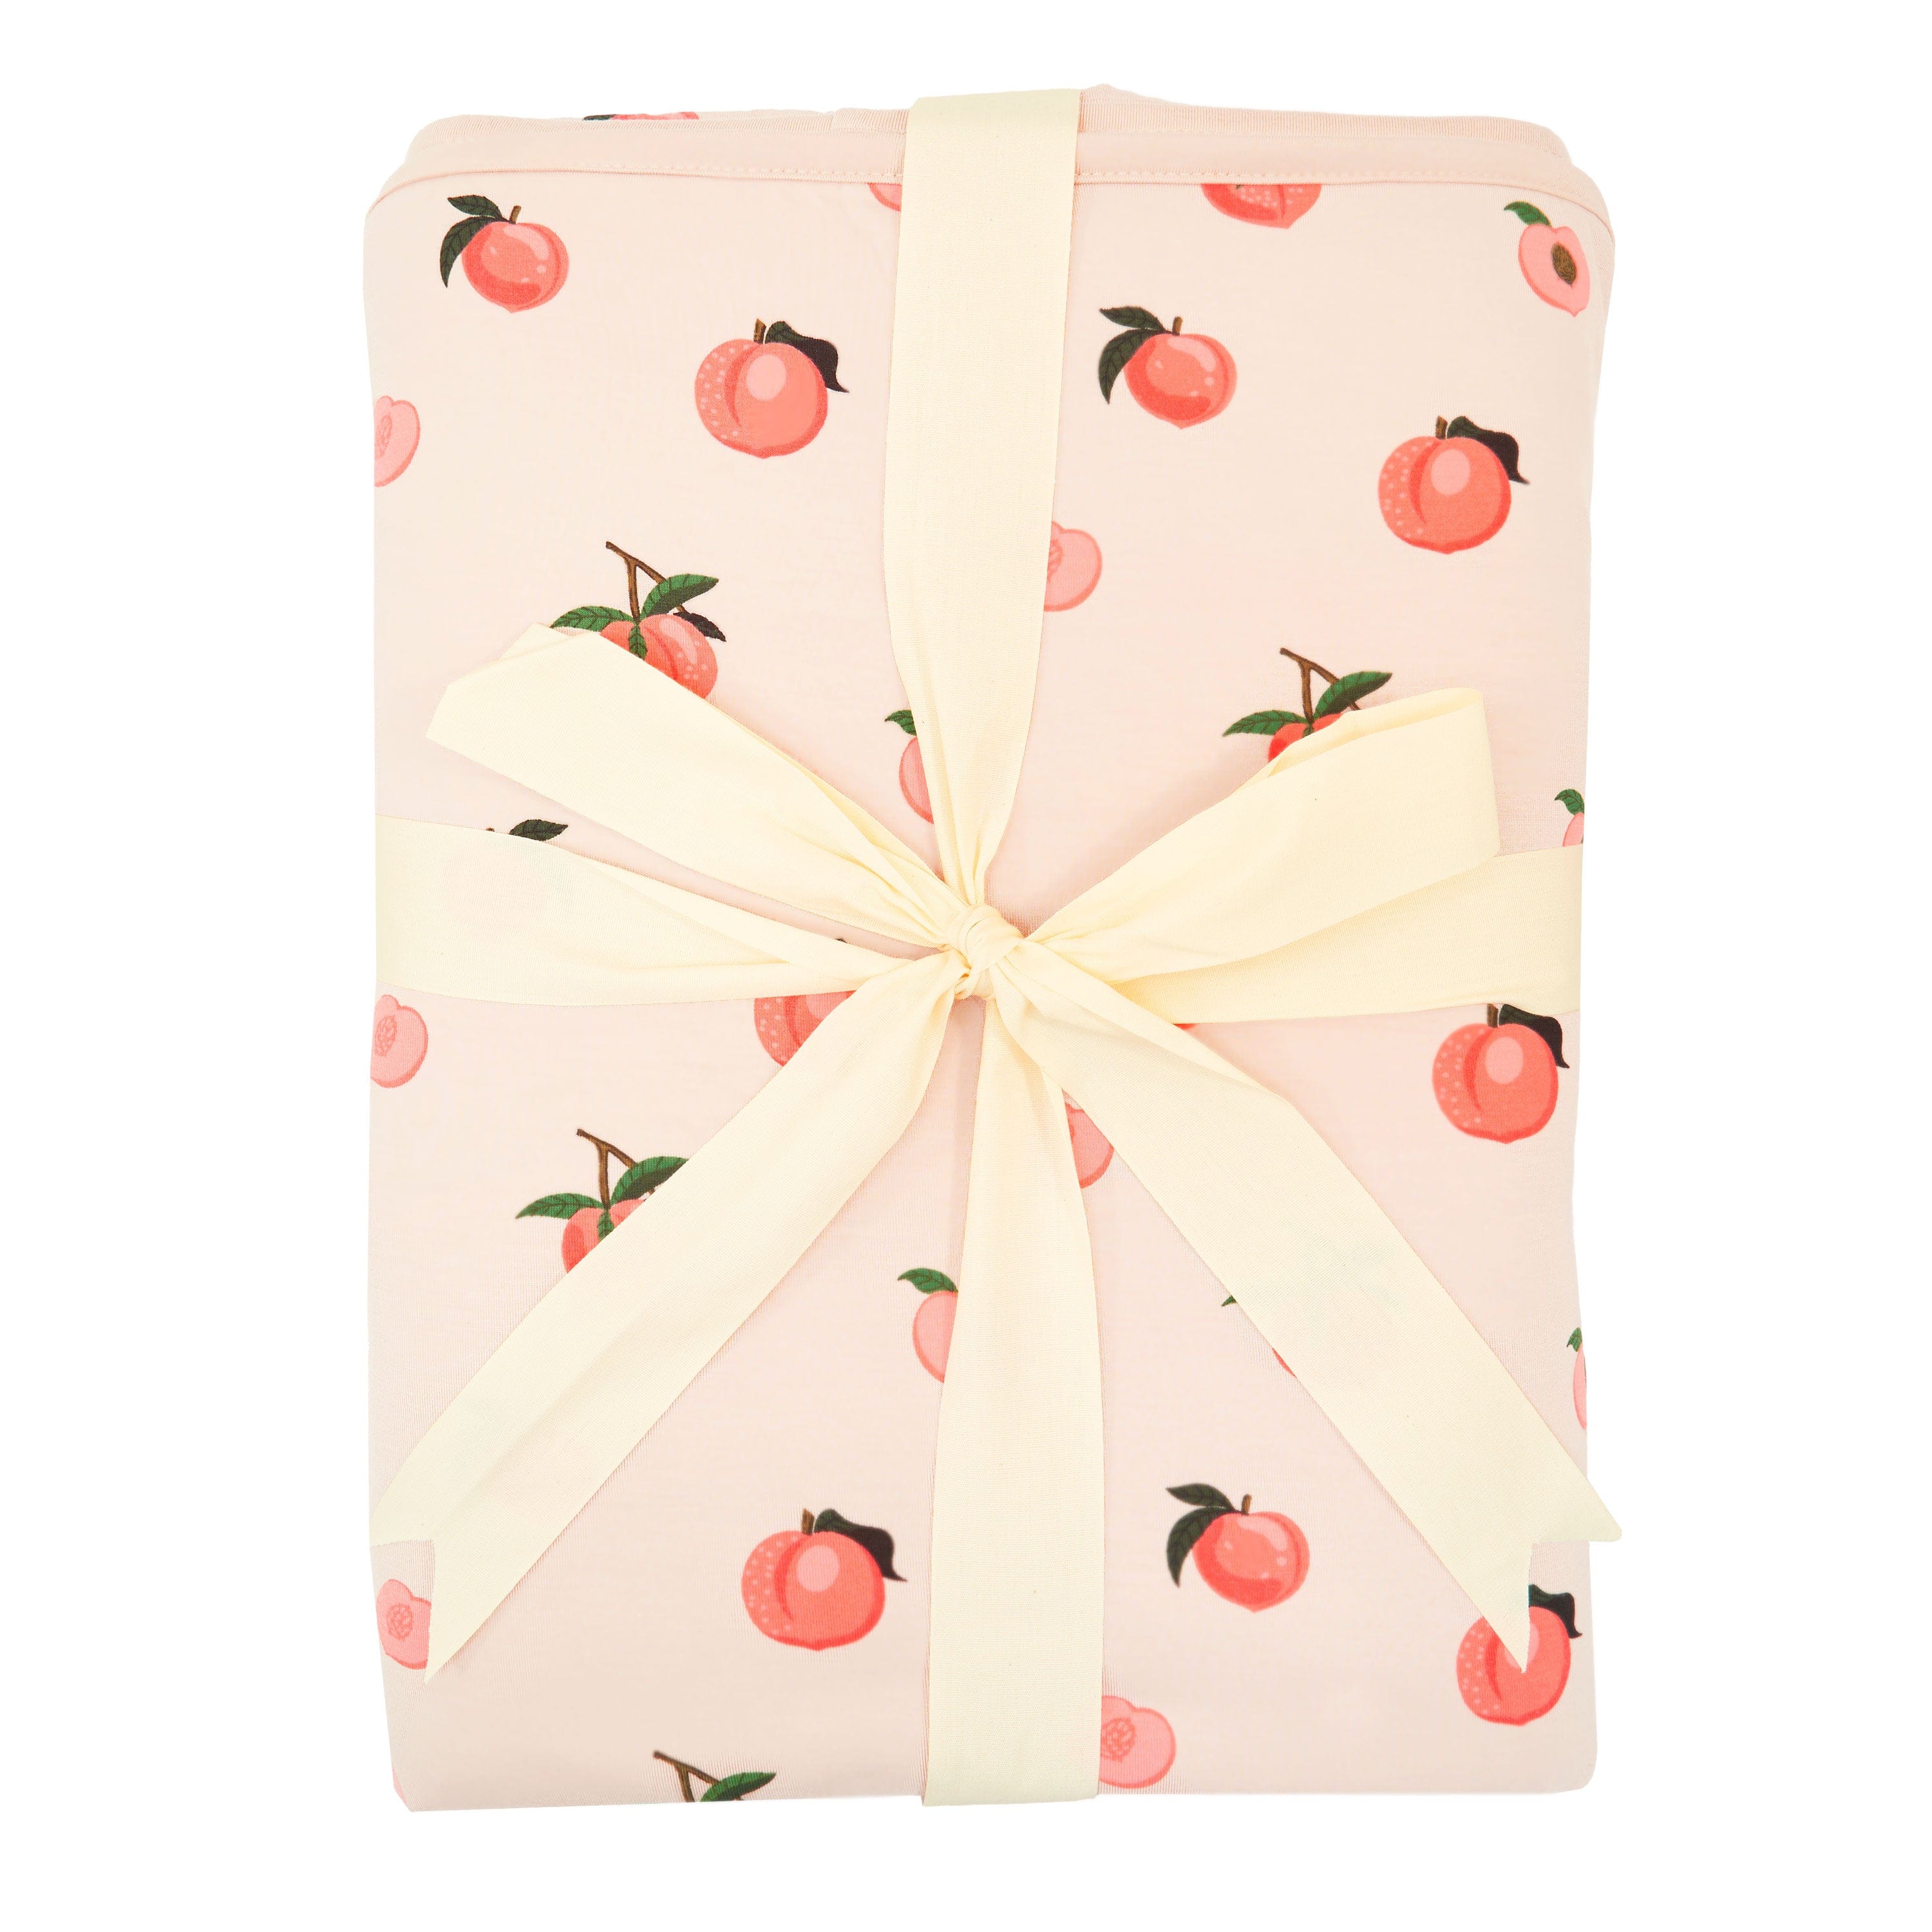 Strawberry Wrapping Paper Made With Your Photos